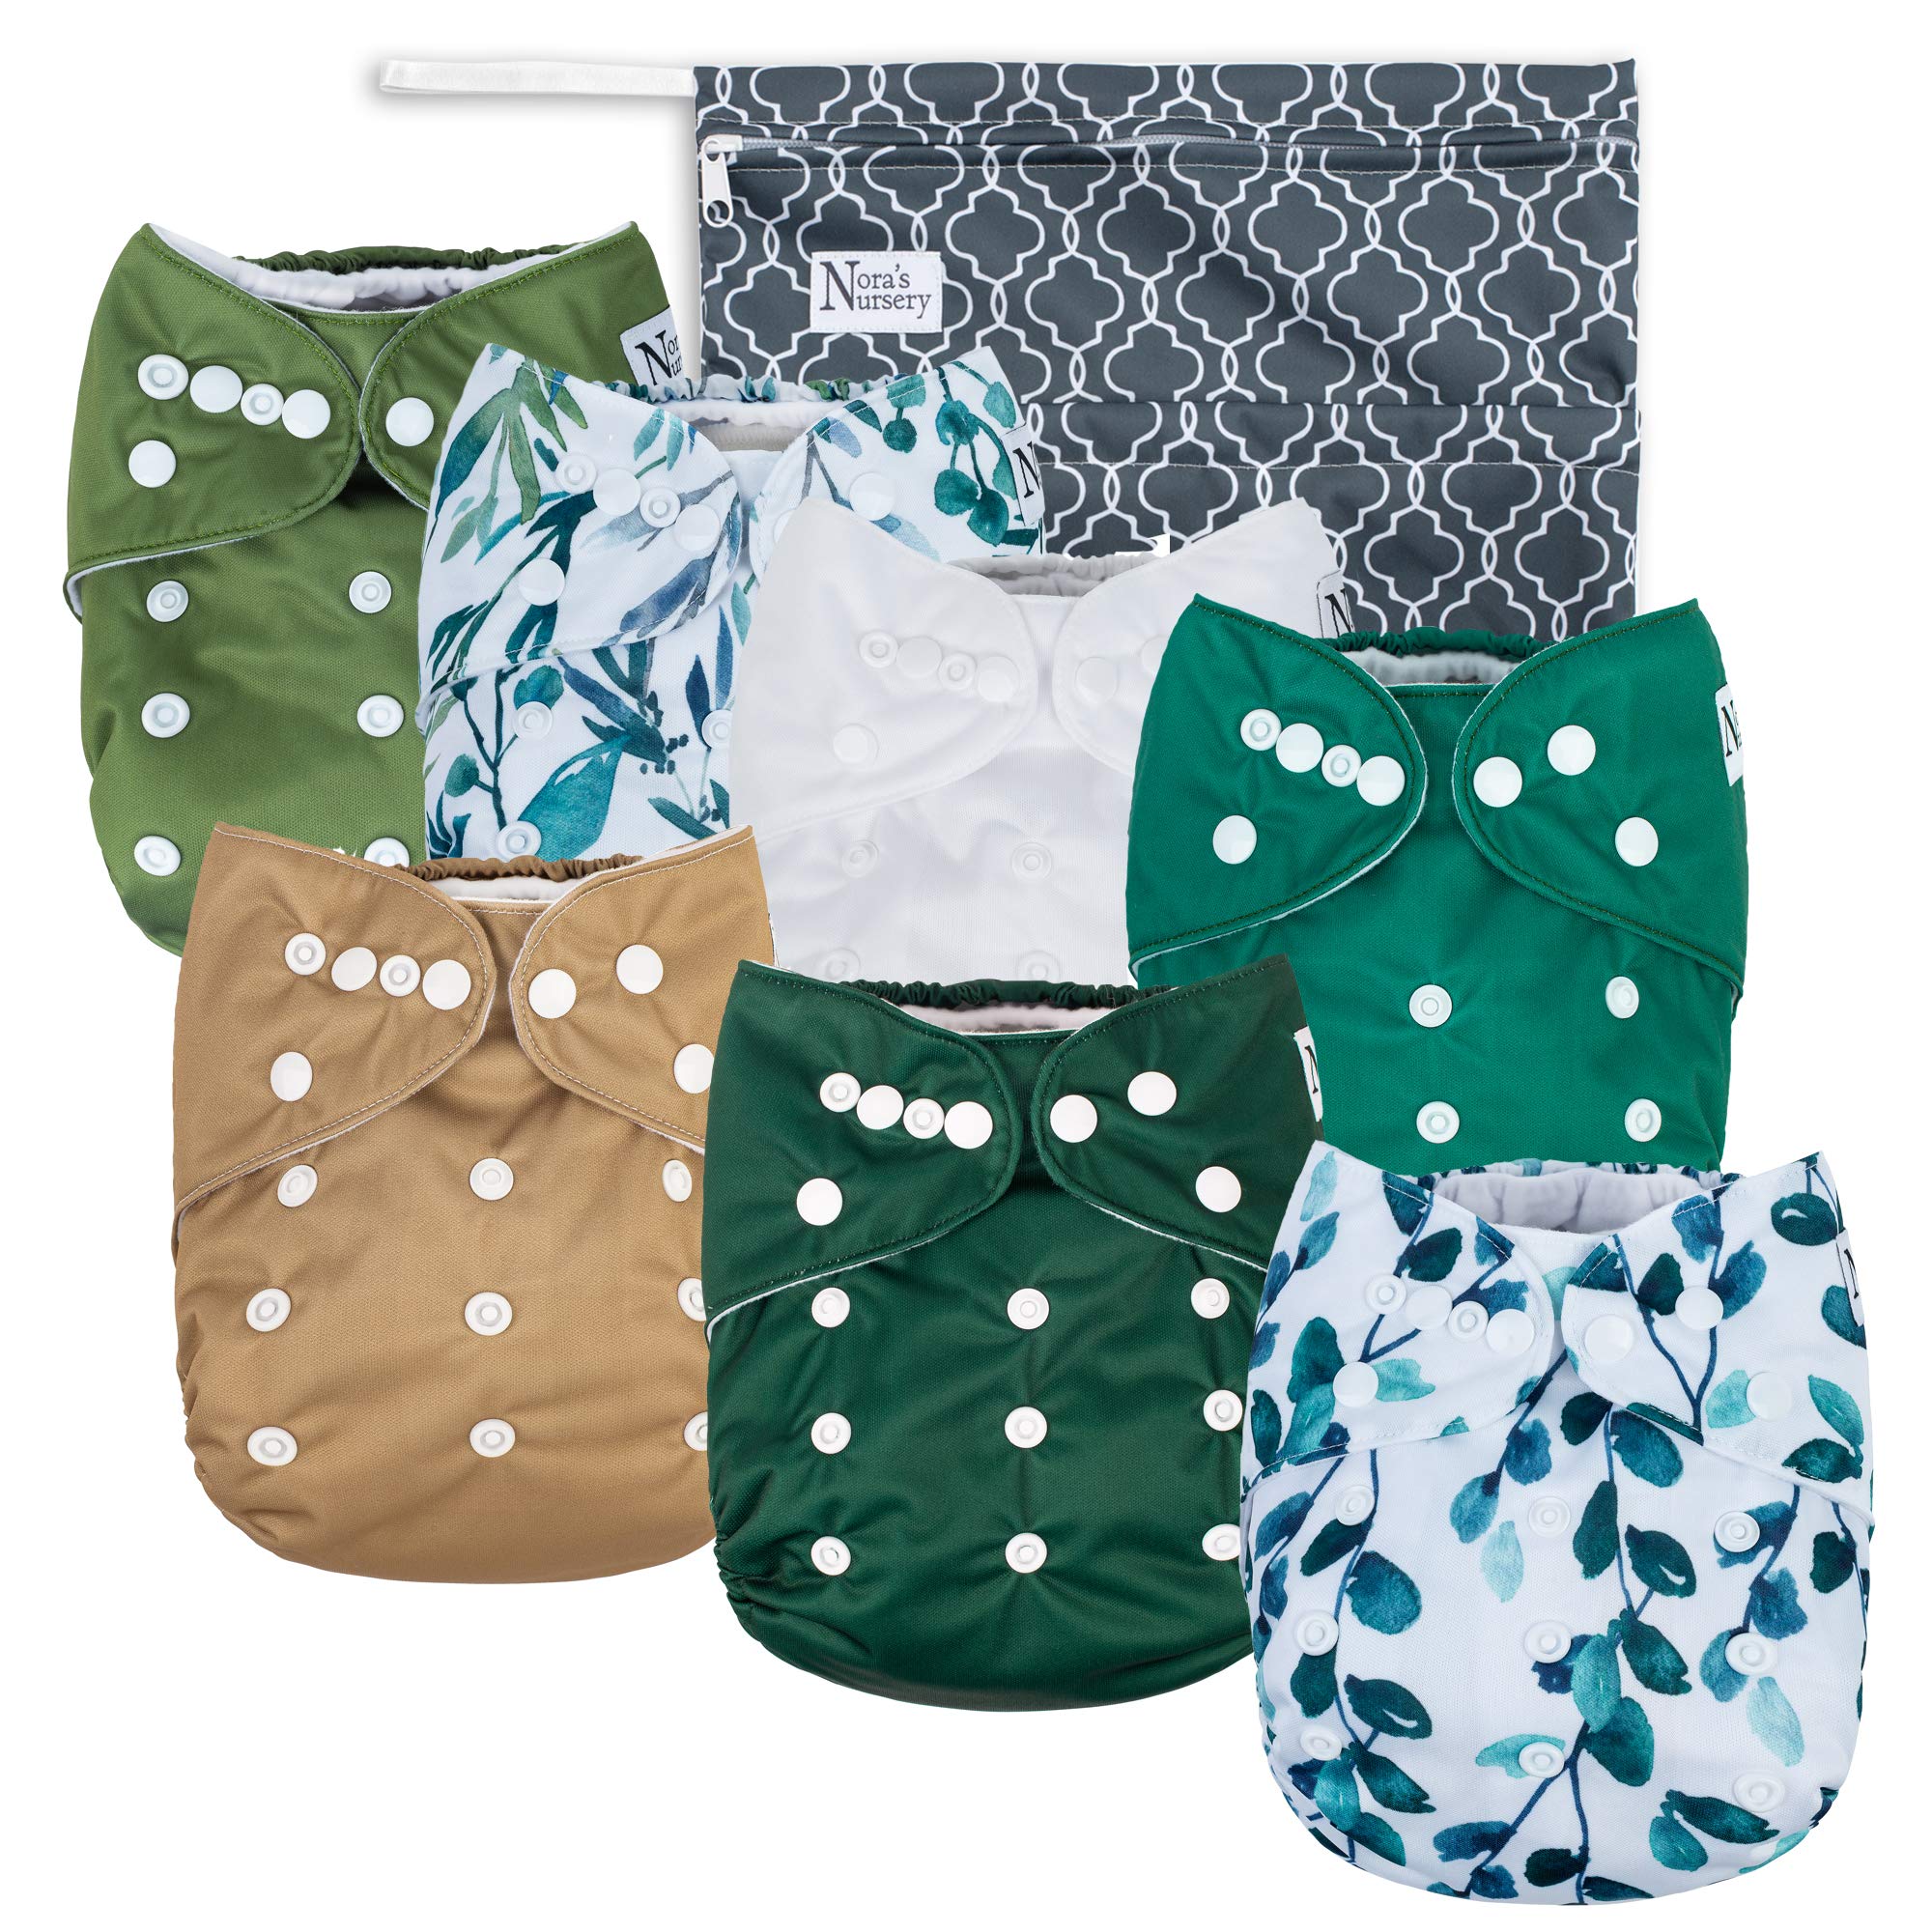 Nora's Nursery Cloth Diapers 7 Pack with 7 Bamboo Inserts & 1 Wet Bag - Waterproof Cover, Washable, Reusable & One Size Adjustable Pocket Diapers for Newborns and Toddlers - Sage and Sea